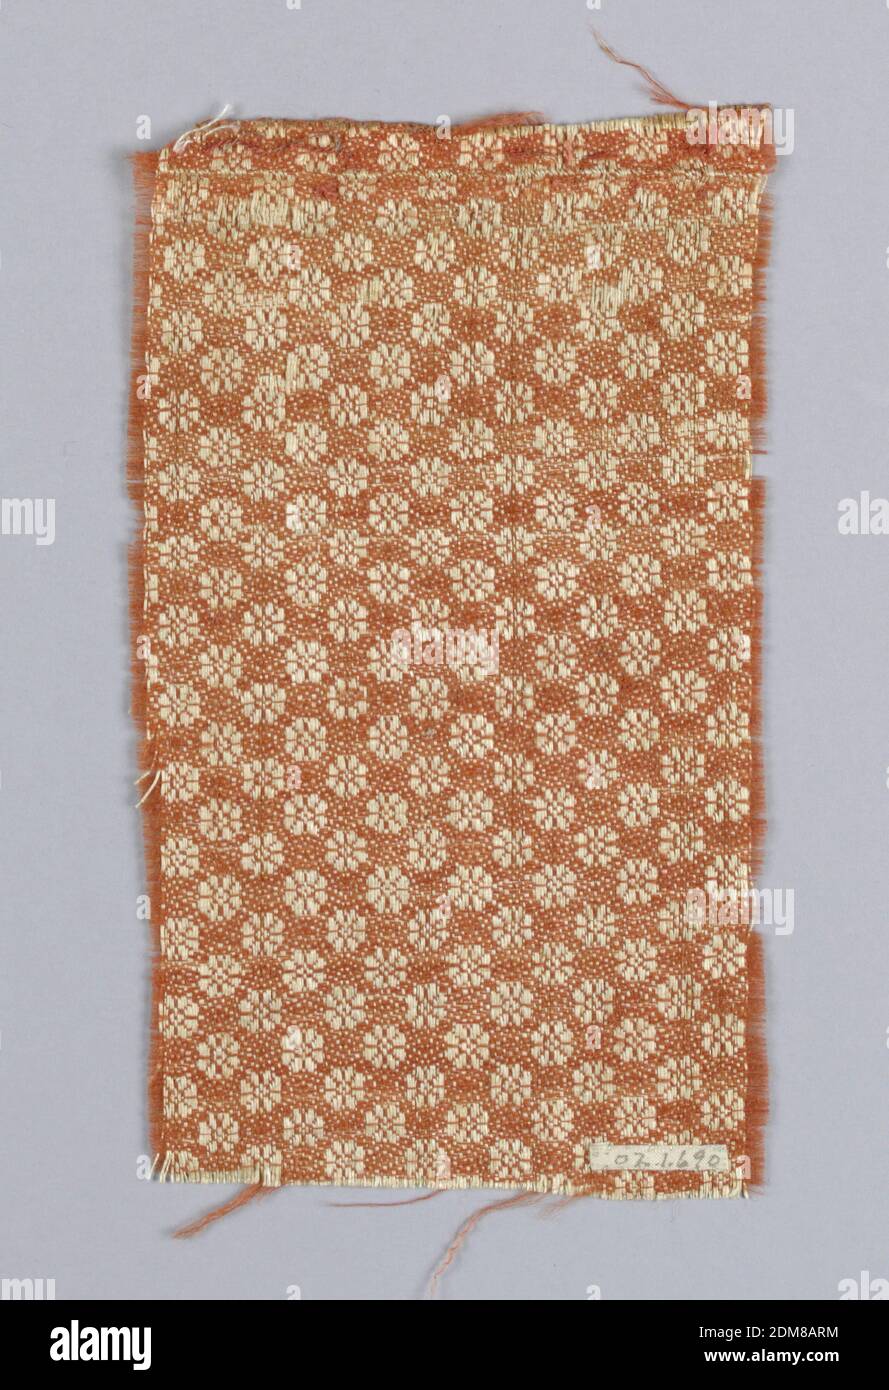 Fragment, Medium: wool, linen Technique: plain weave with floats, Simple floral forms in orange and white reversible fabric., Spain, 17th century, woven textiles, Fragment Stock Photo